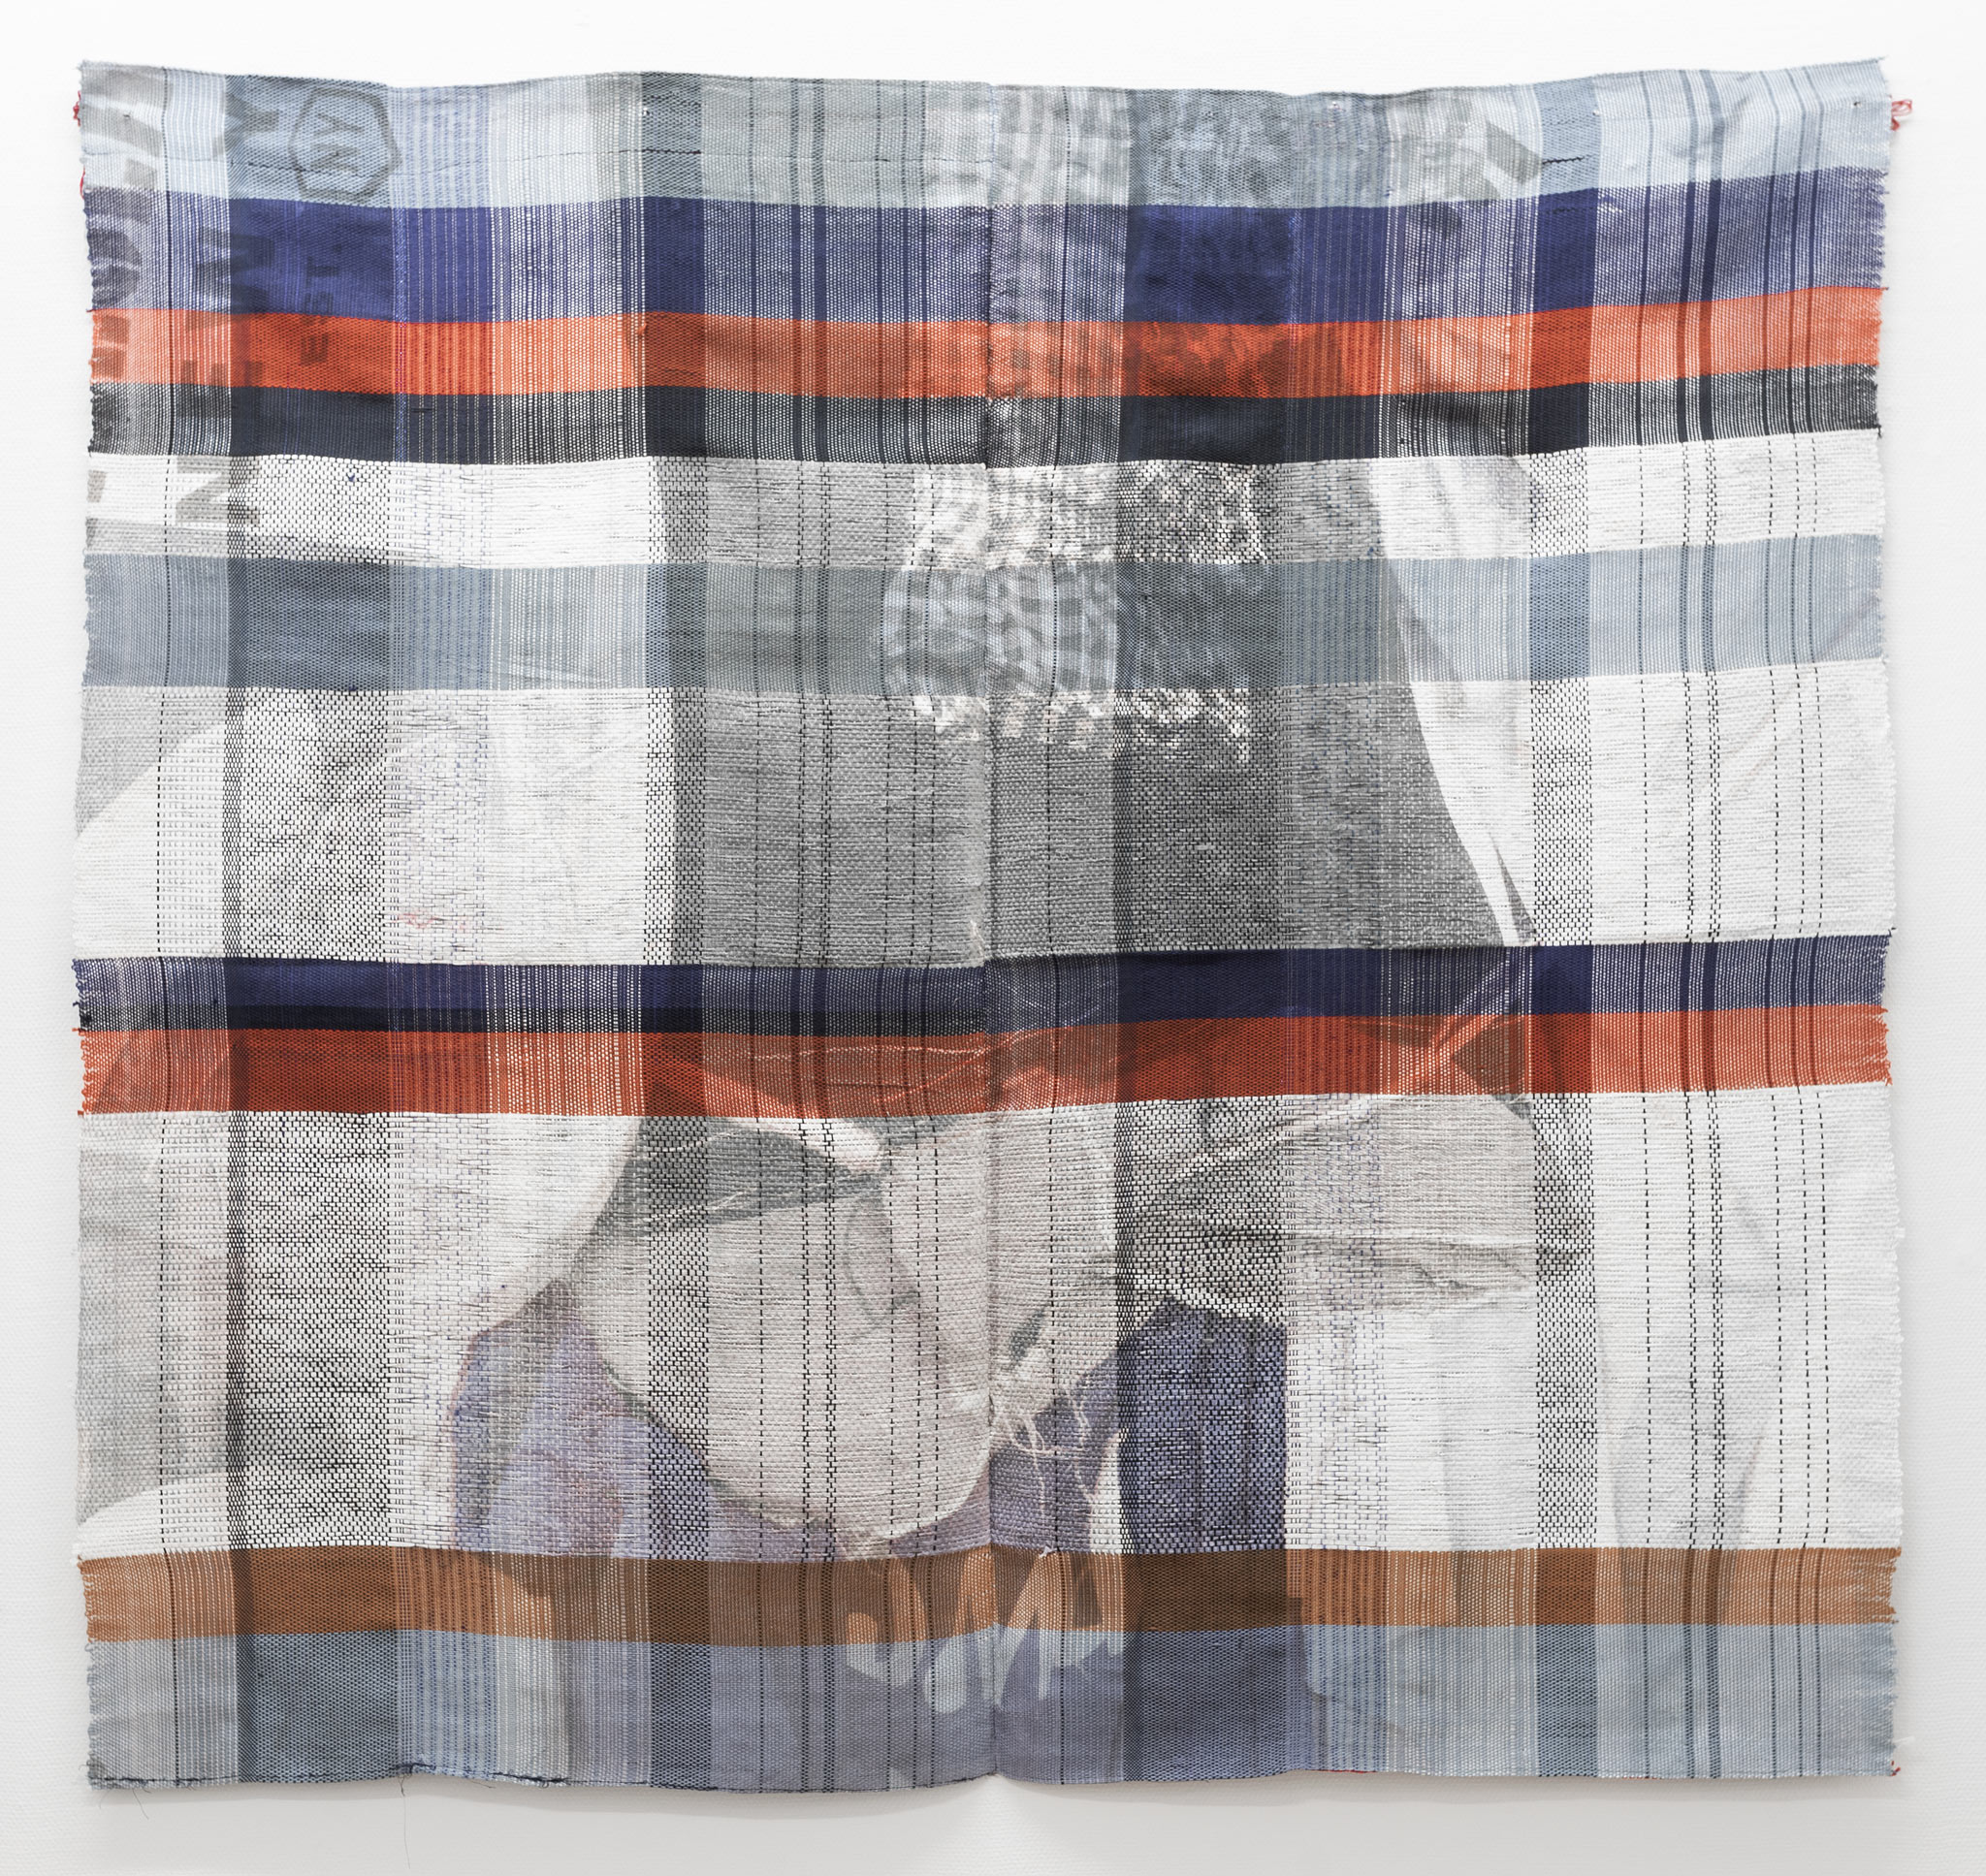 1. Marie Hazard - Alright, 2018, hand-woven in paper, linen, mohair, digital print sublimation, 198 x 178 cm,